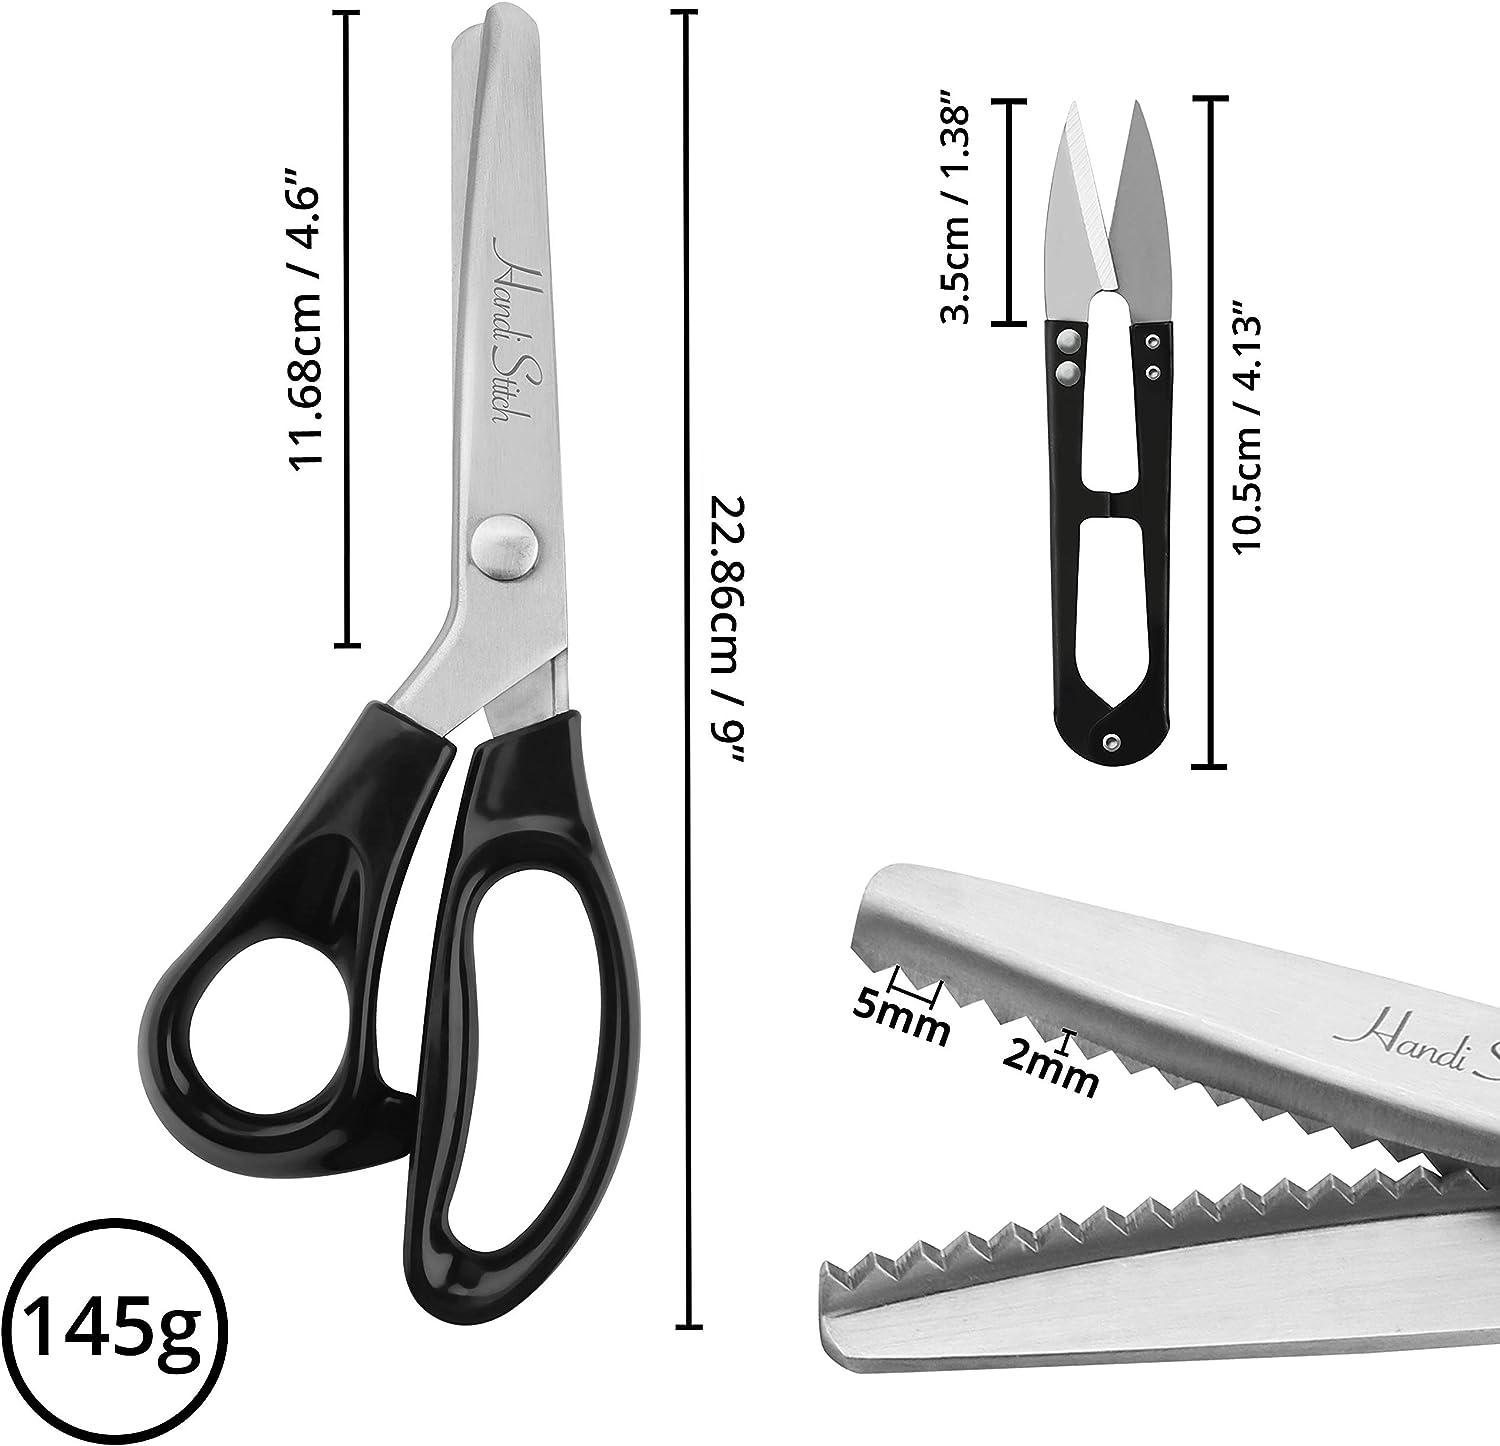 8 Pinking Shears Stainless Steel Crafting Cutting Scissors Zig Zag Pattern